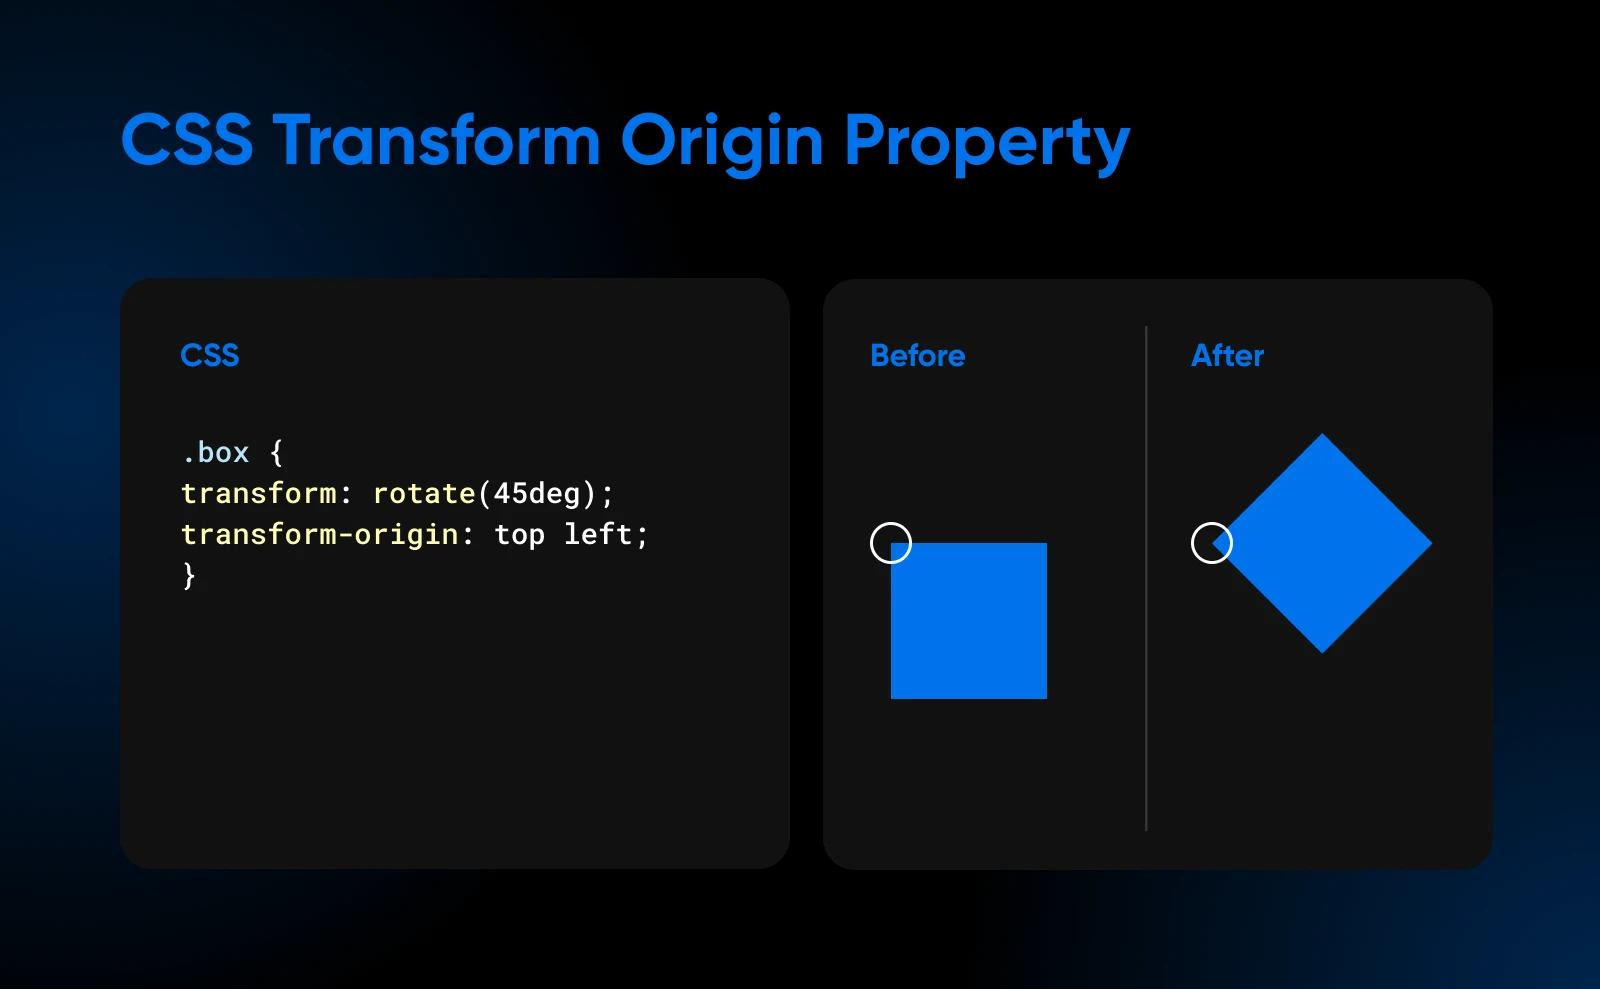 CSS code rotate transform-origin property on the left, and the before vs. after designs for the element on the right. 